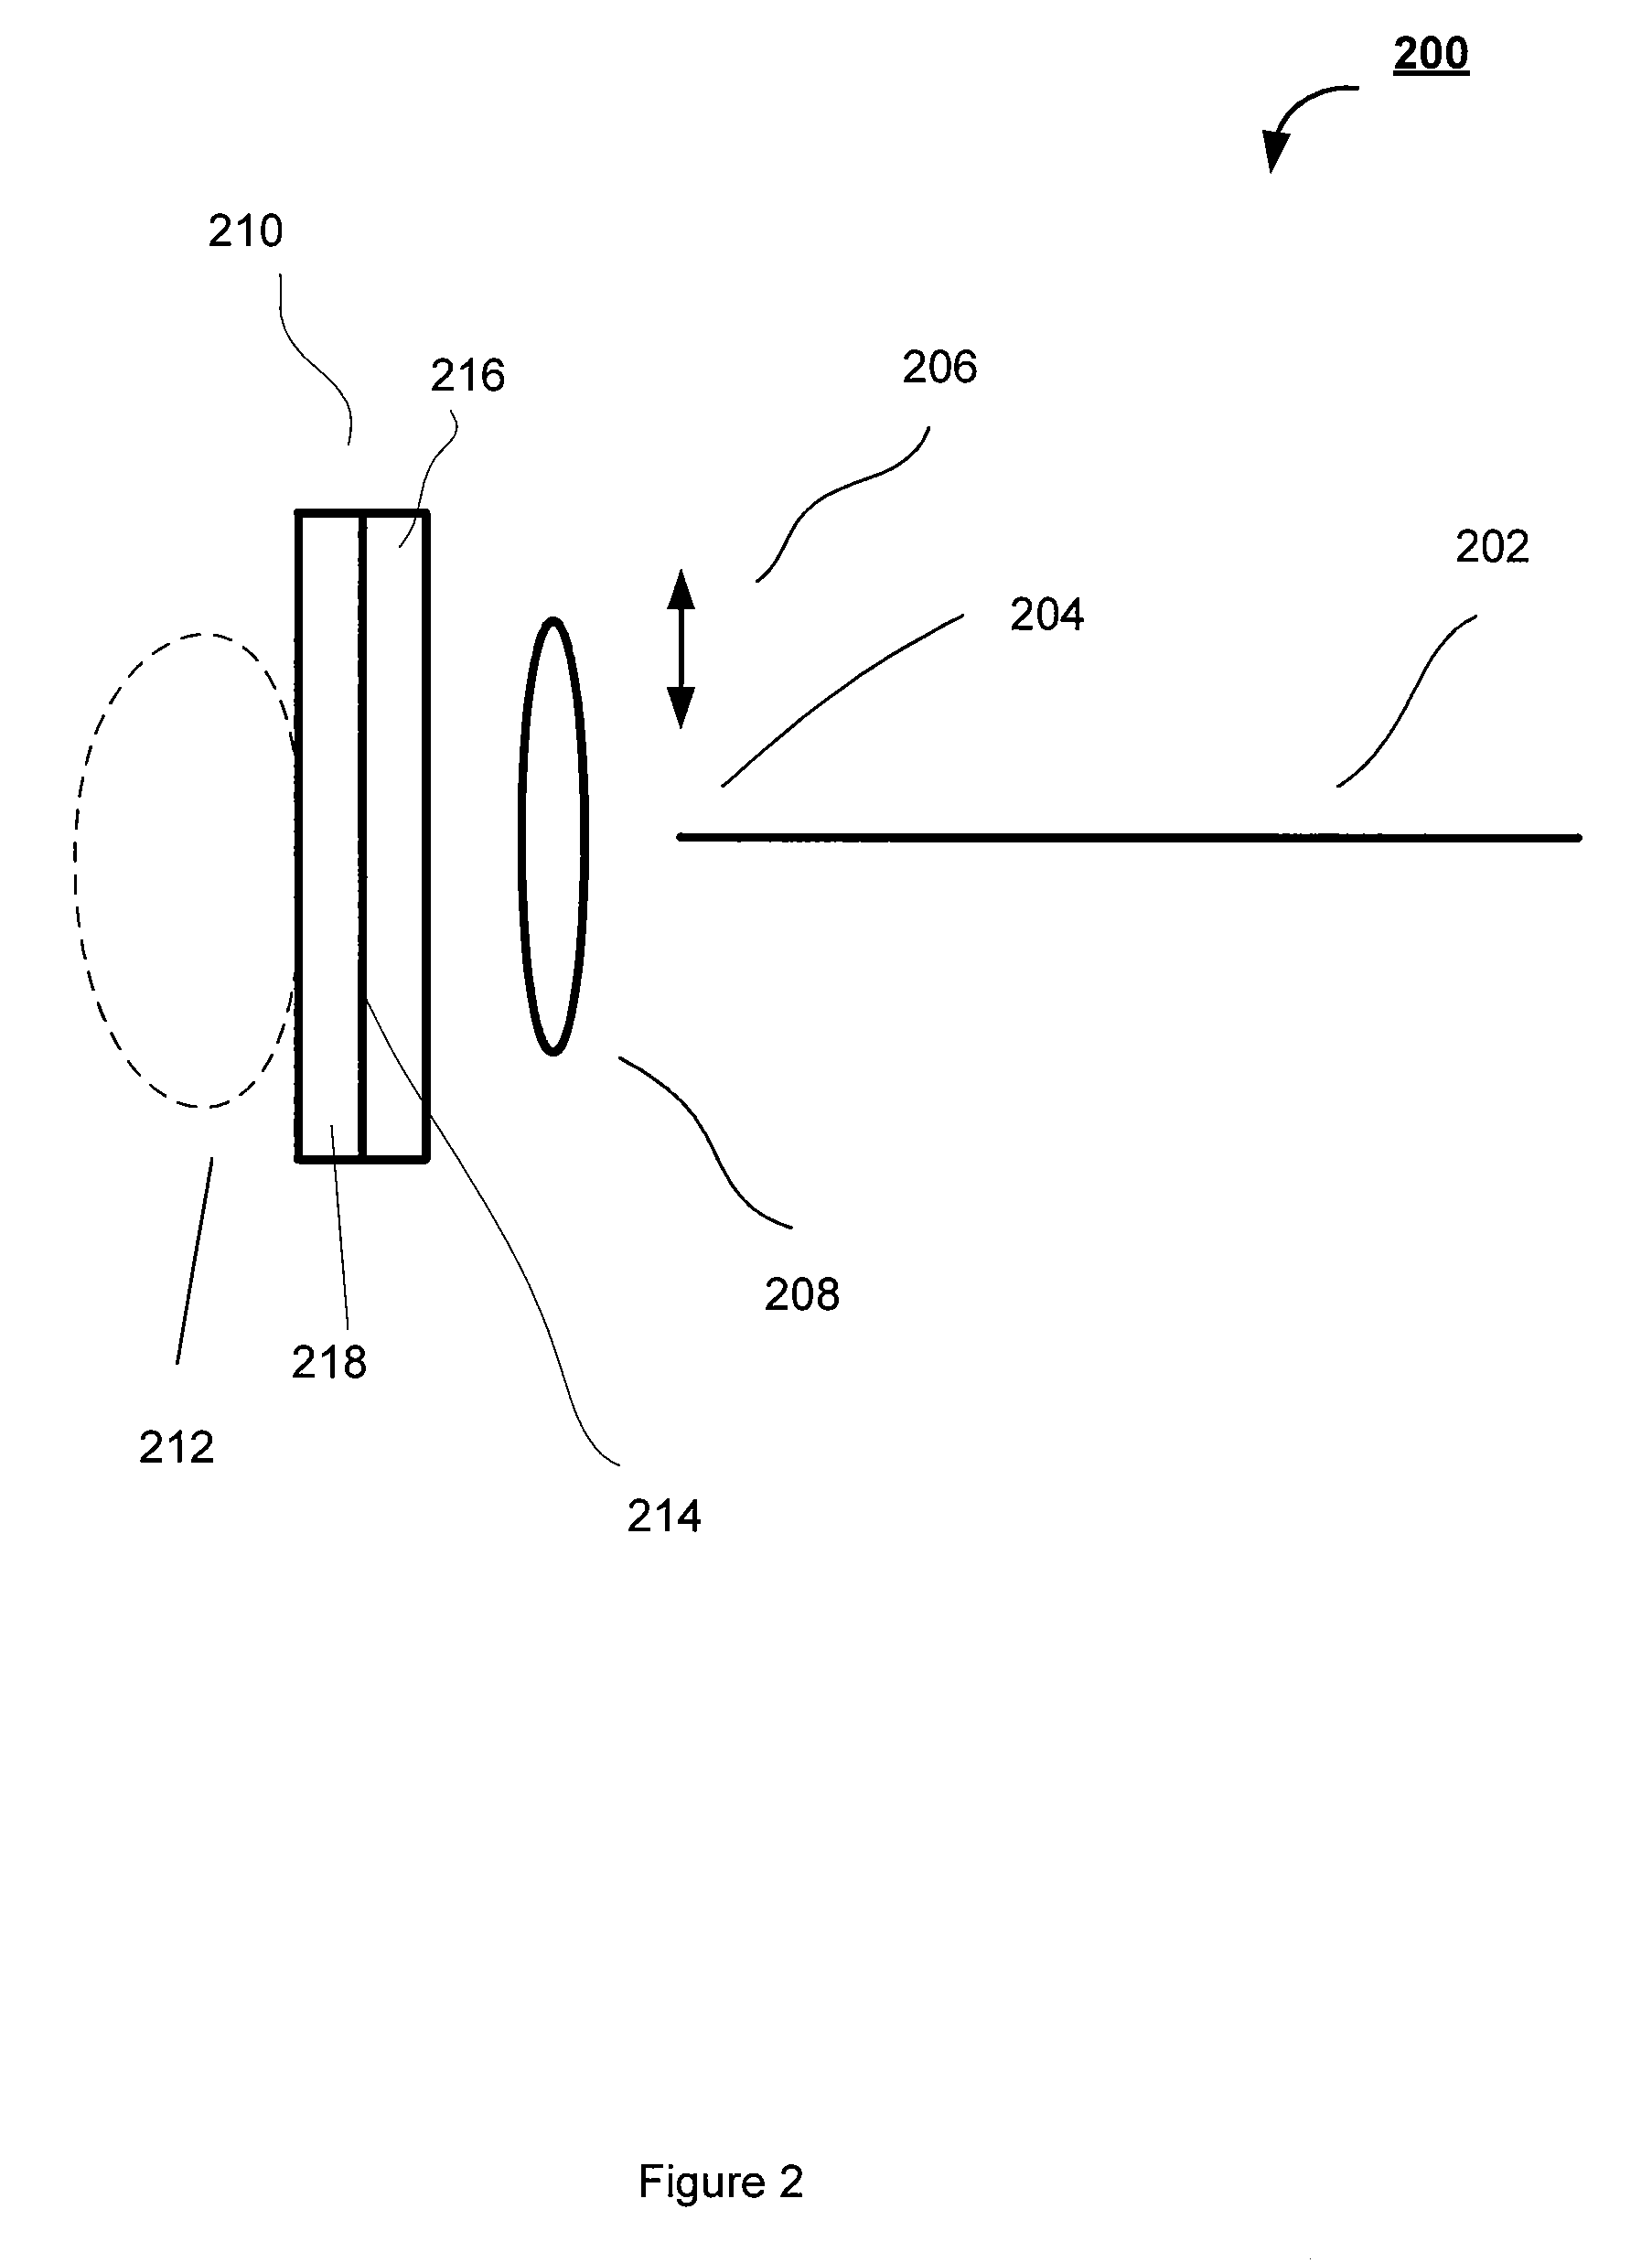 Common path systems and methods for frequency domain and time domain optical coherence tomography using non-specular reference reflection and a delivering device for optical radiation with a partially optically transparent non-specular reference reflector